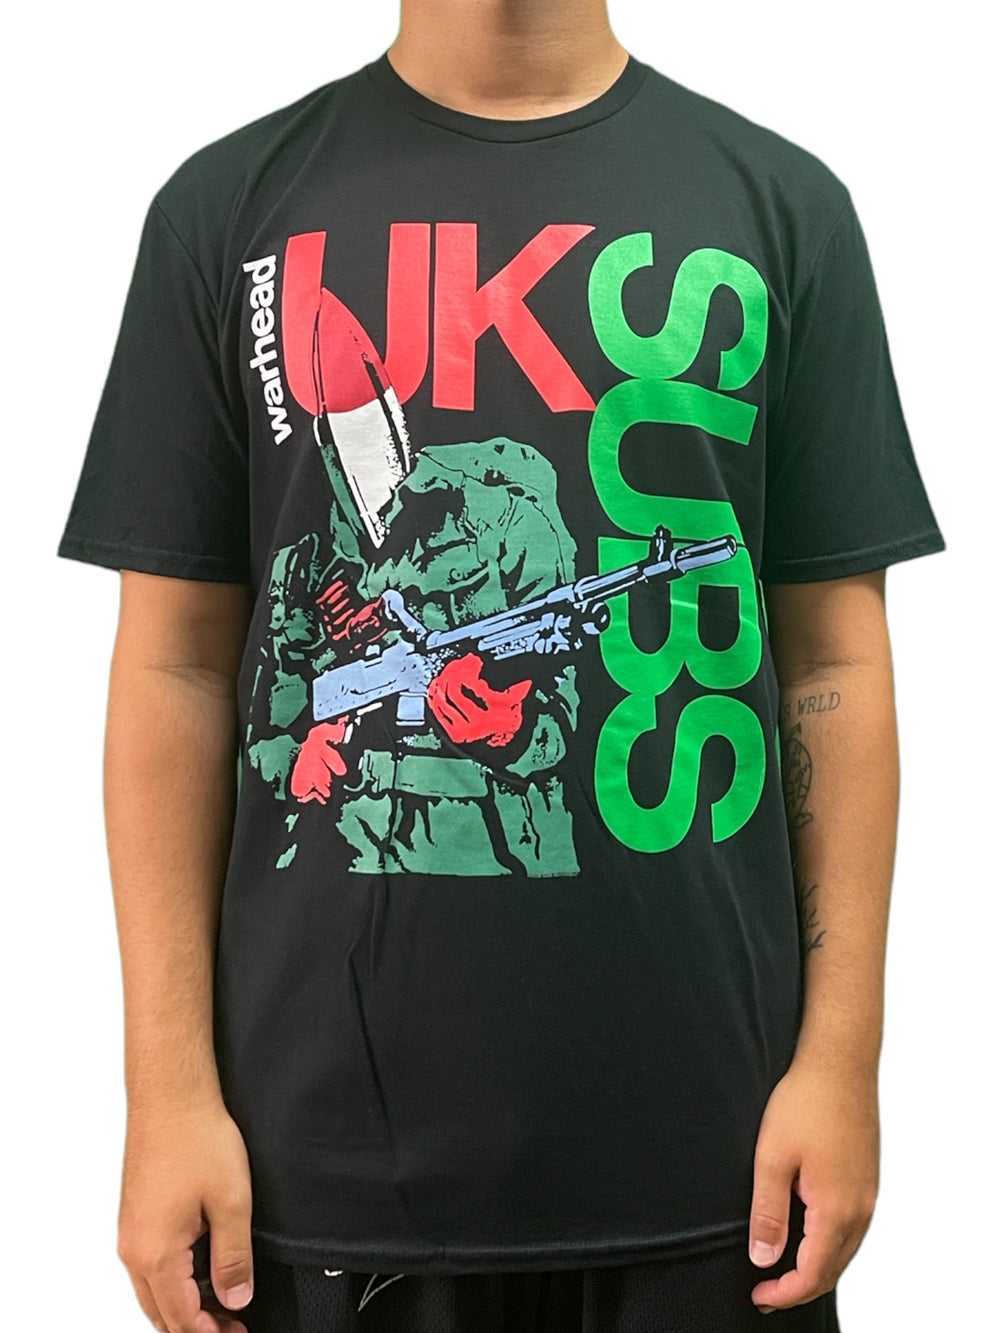 UK Subs Warhead Unisex Official T Shirt Various Sizes